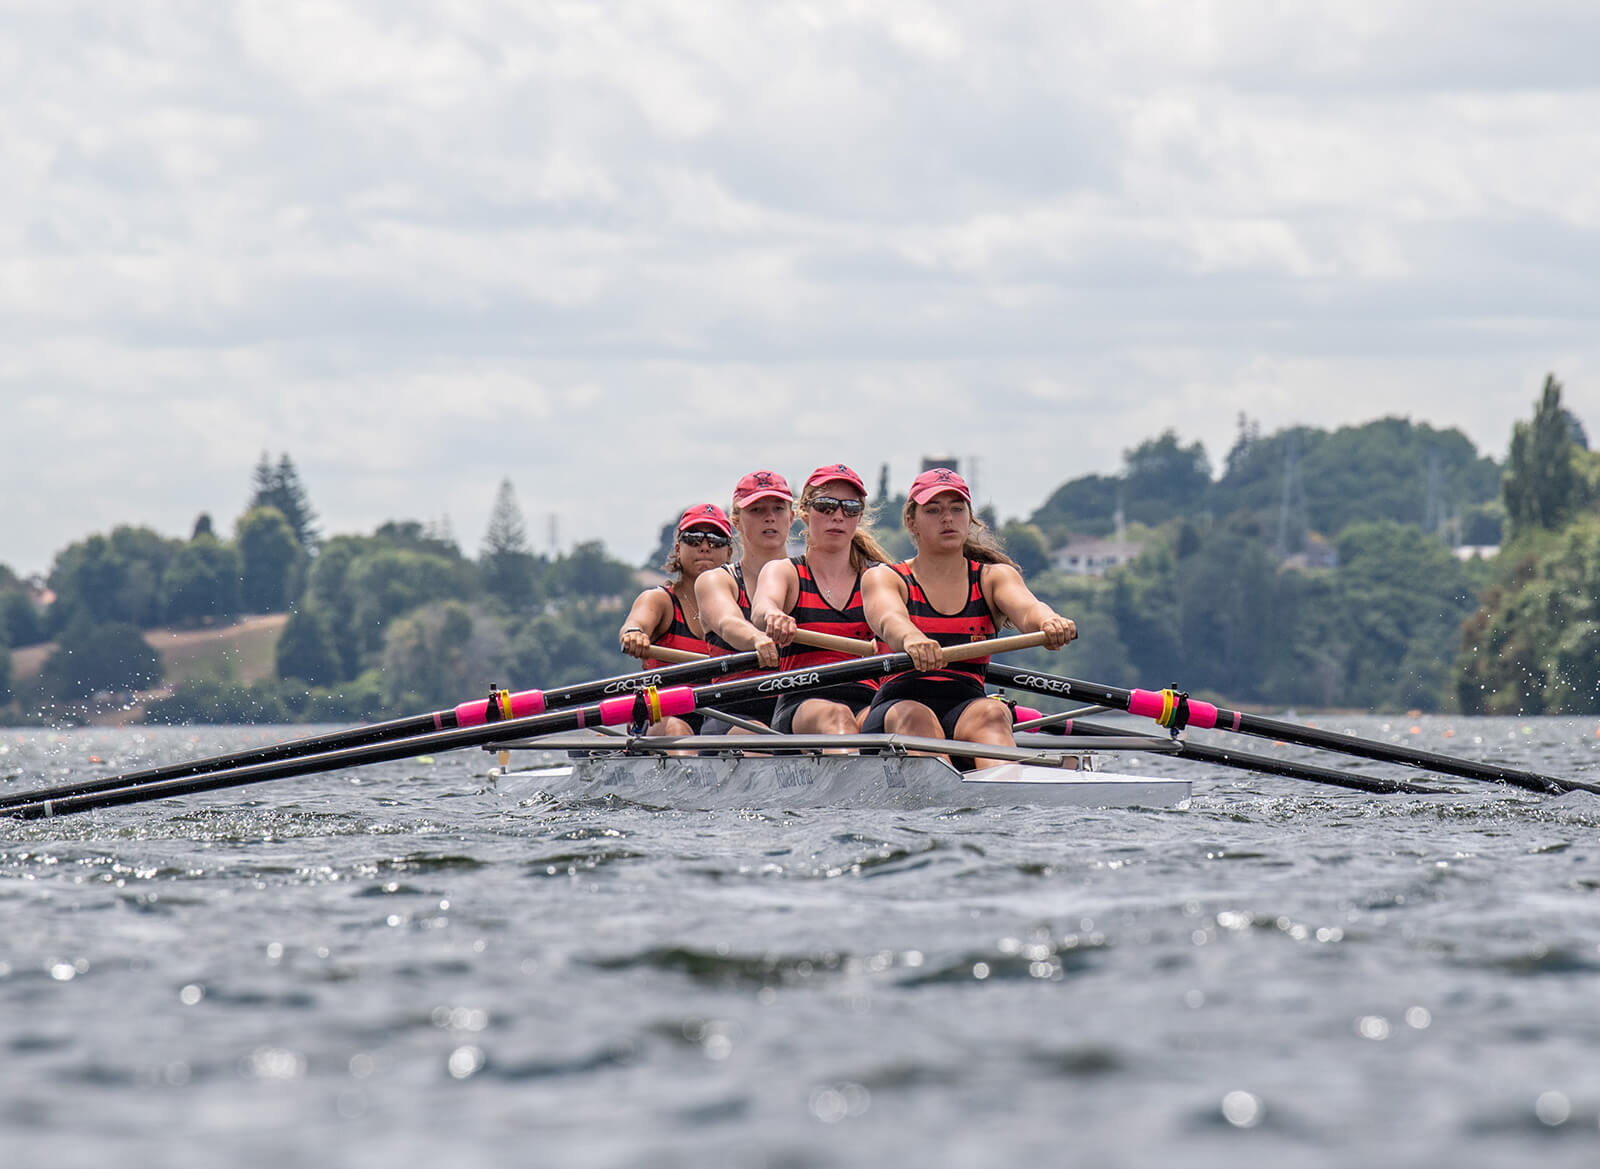 The camera is low in the water. There are four girls in red and black stripped tops with pink hats racing in the water on a S L racing coxless four quad rowing boat. They have determined looks on their faces.